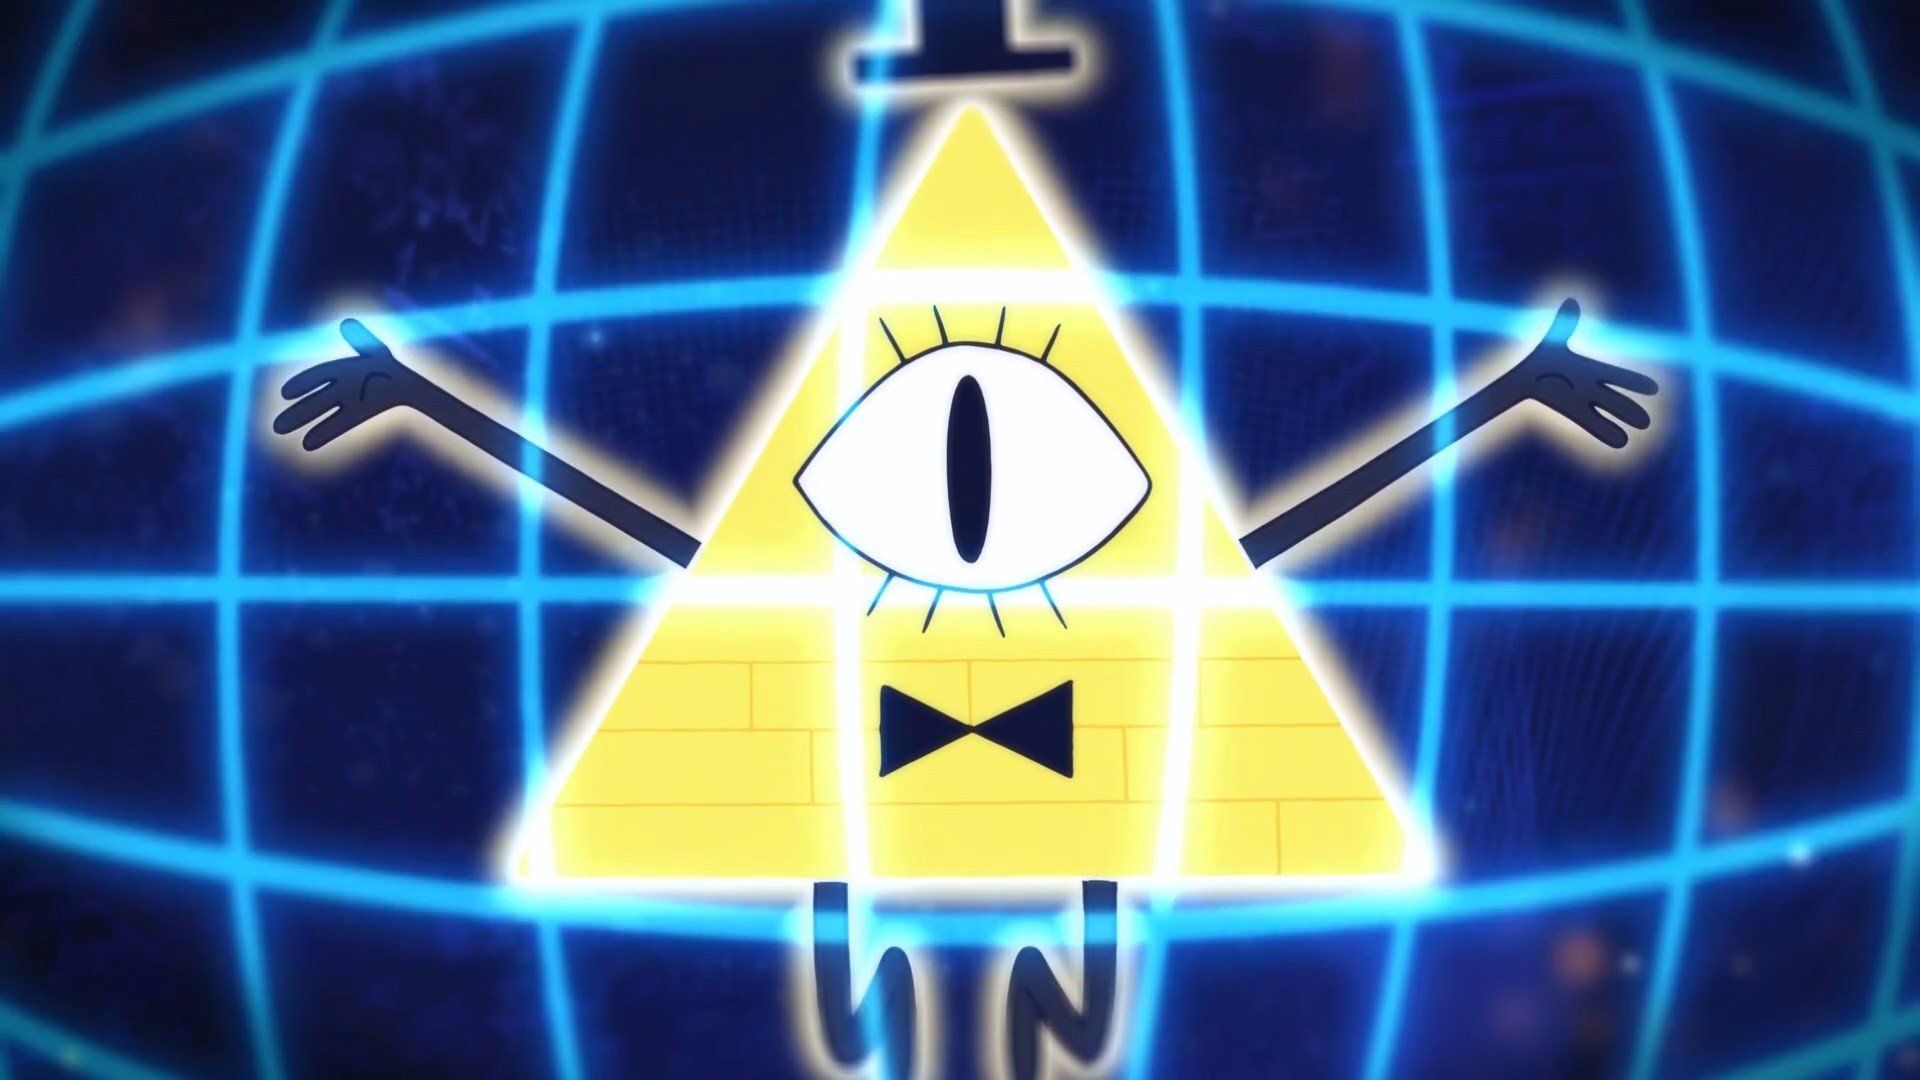 Bill Cipher and Ford